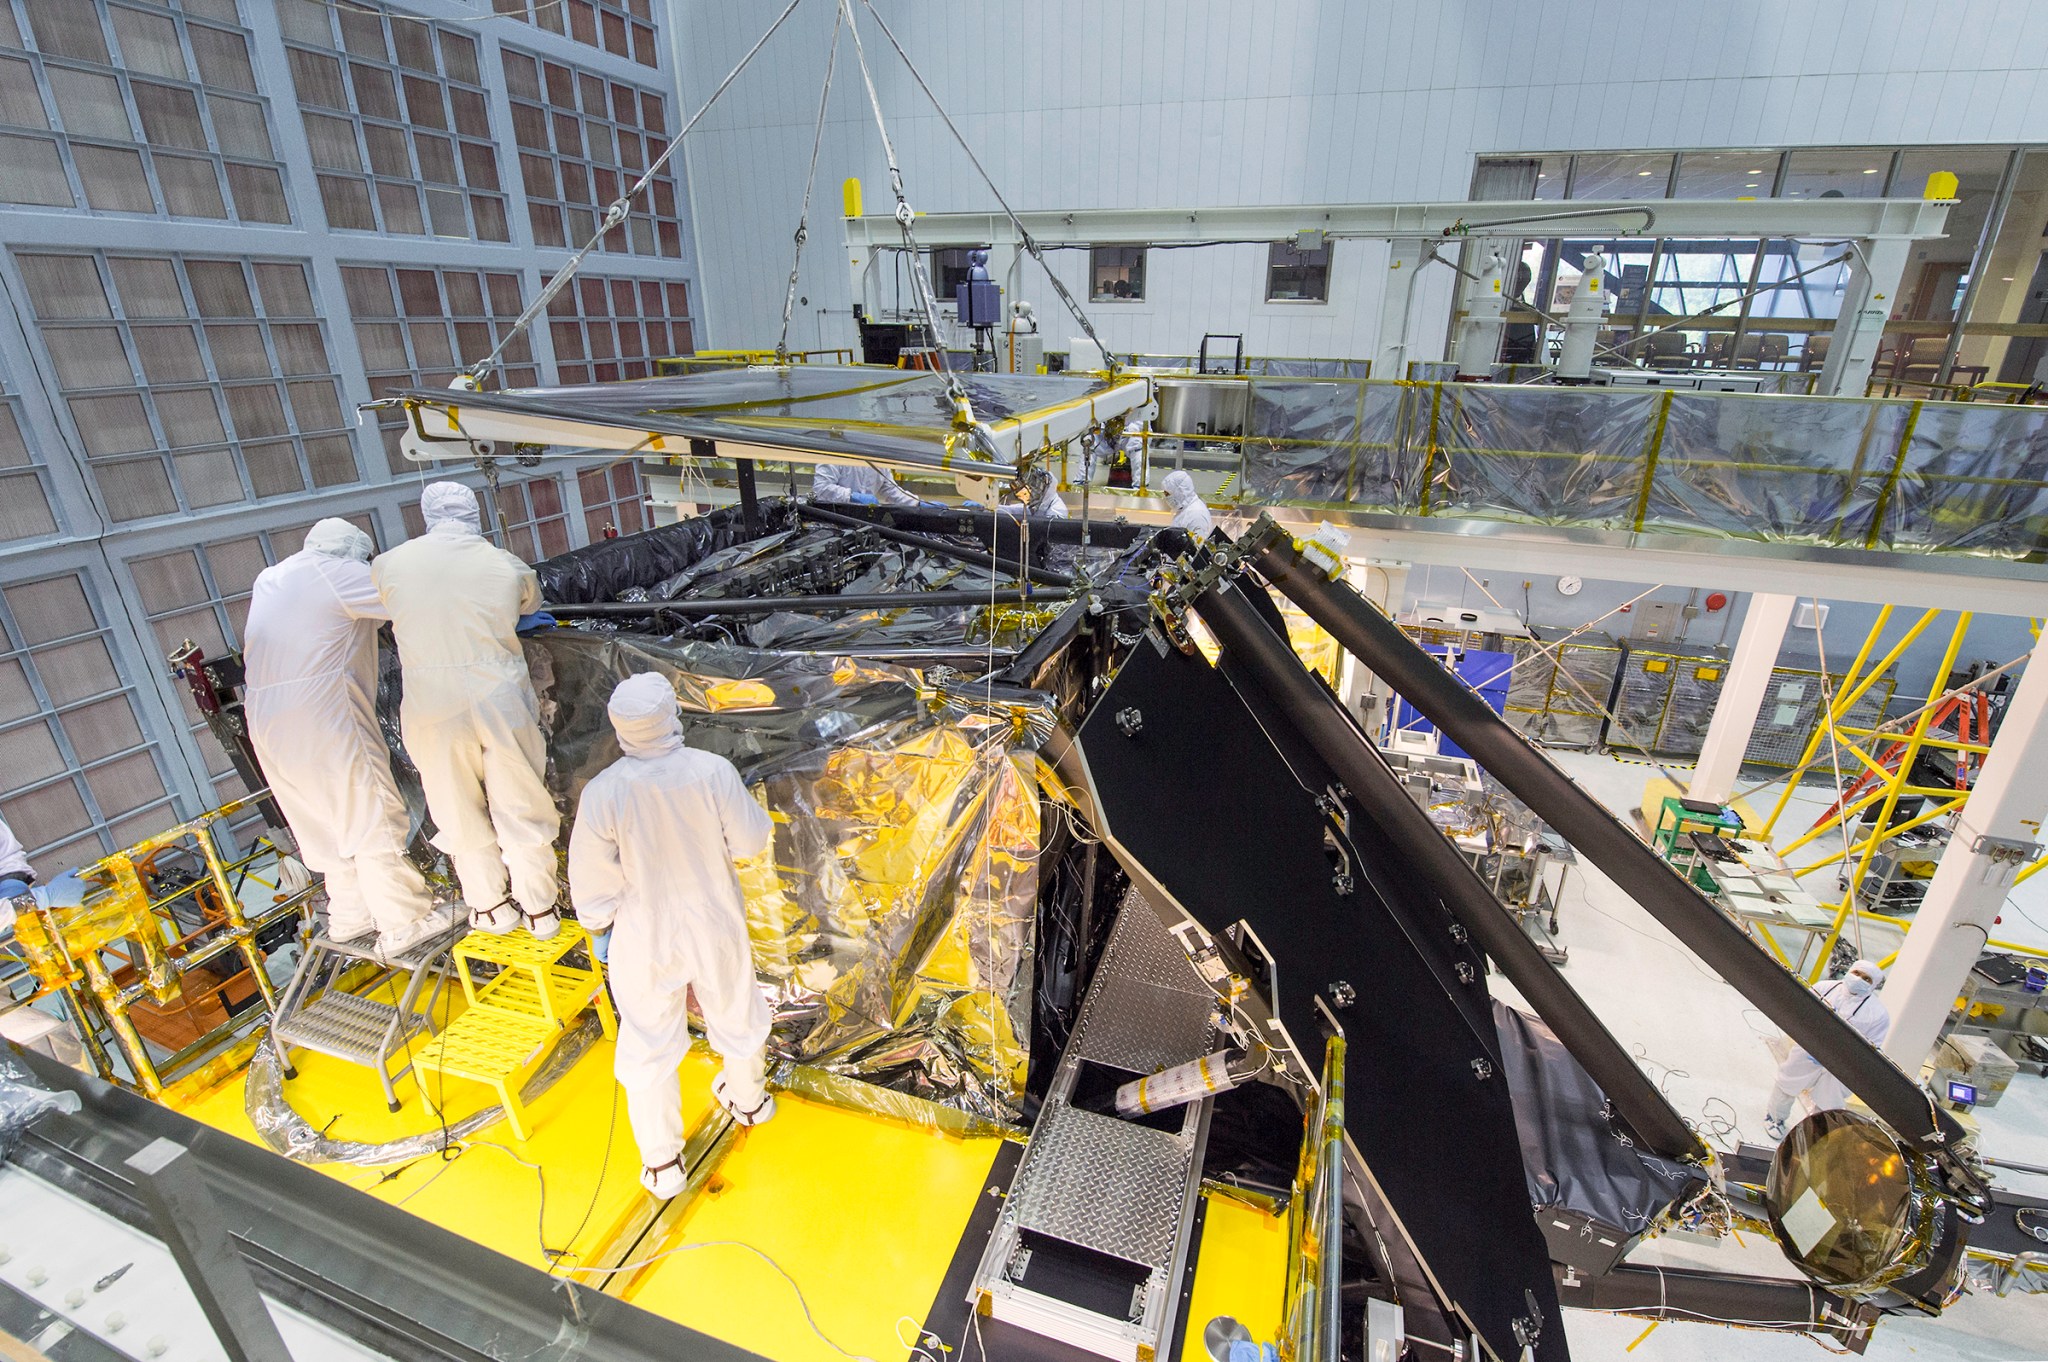 Goddard clean room with the JWST telescope in it.